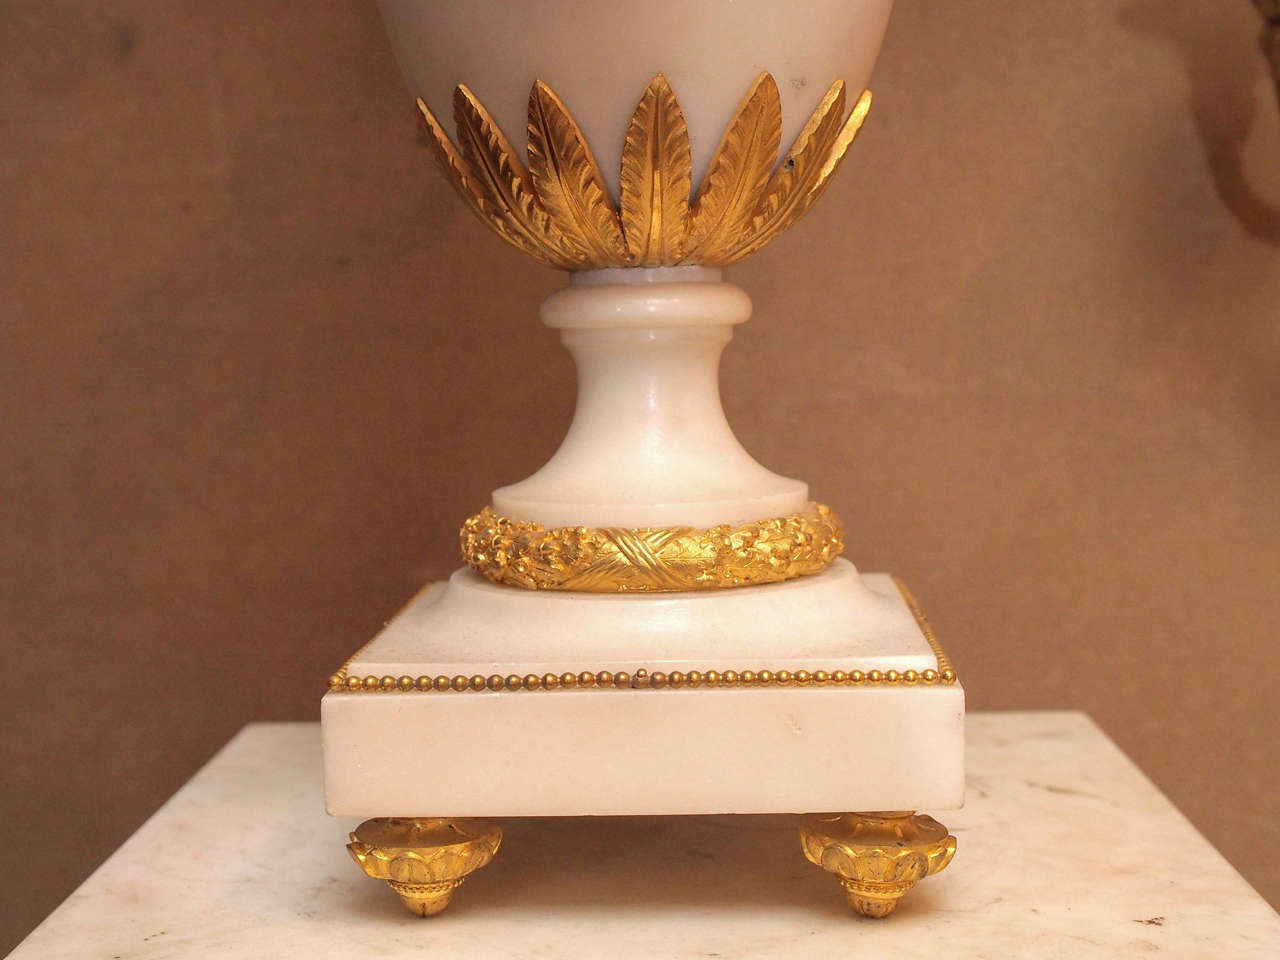 Pair of Antique Carrara Marble and Ormolu Pedestals and Urns circa 1850 For Sale 3